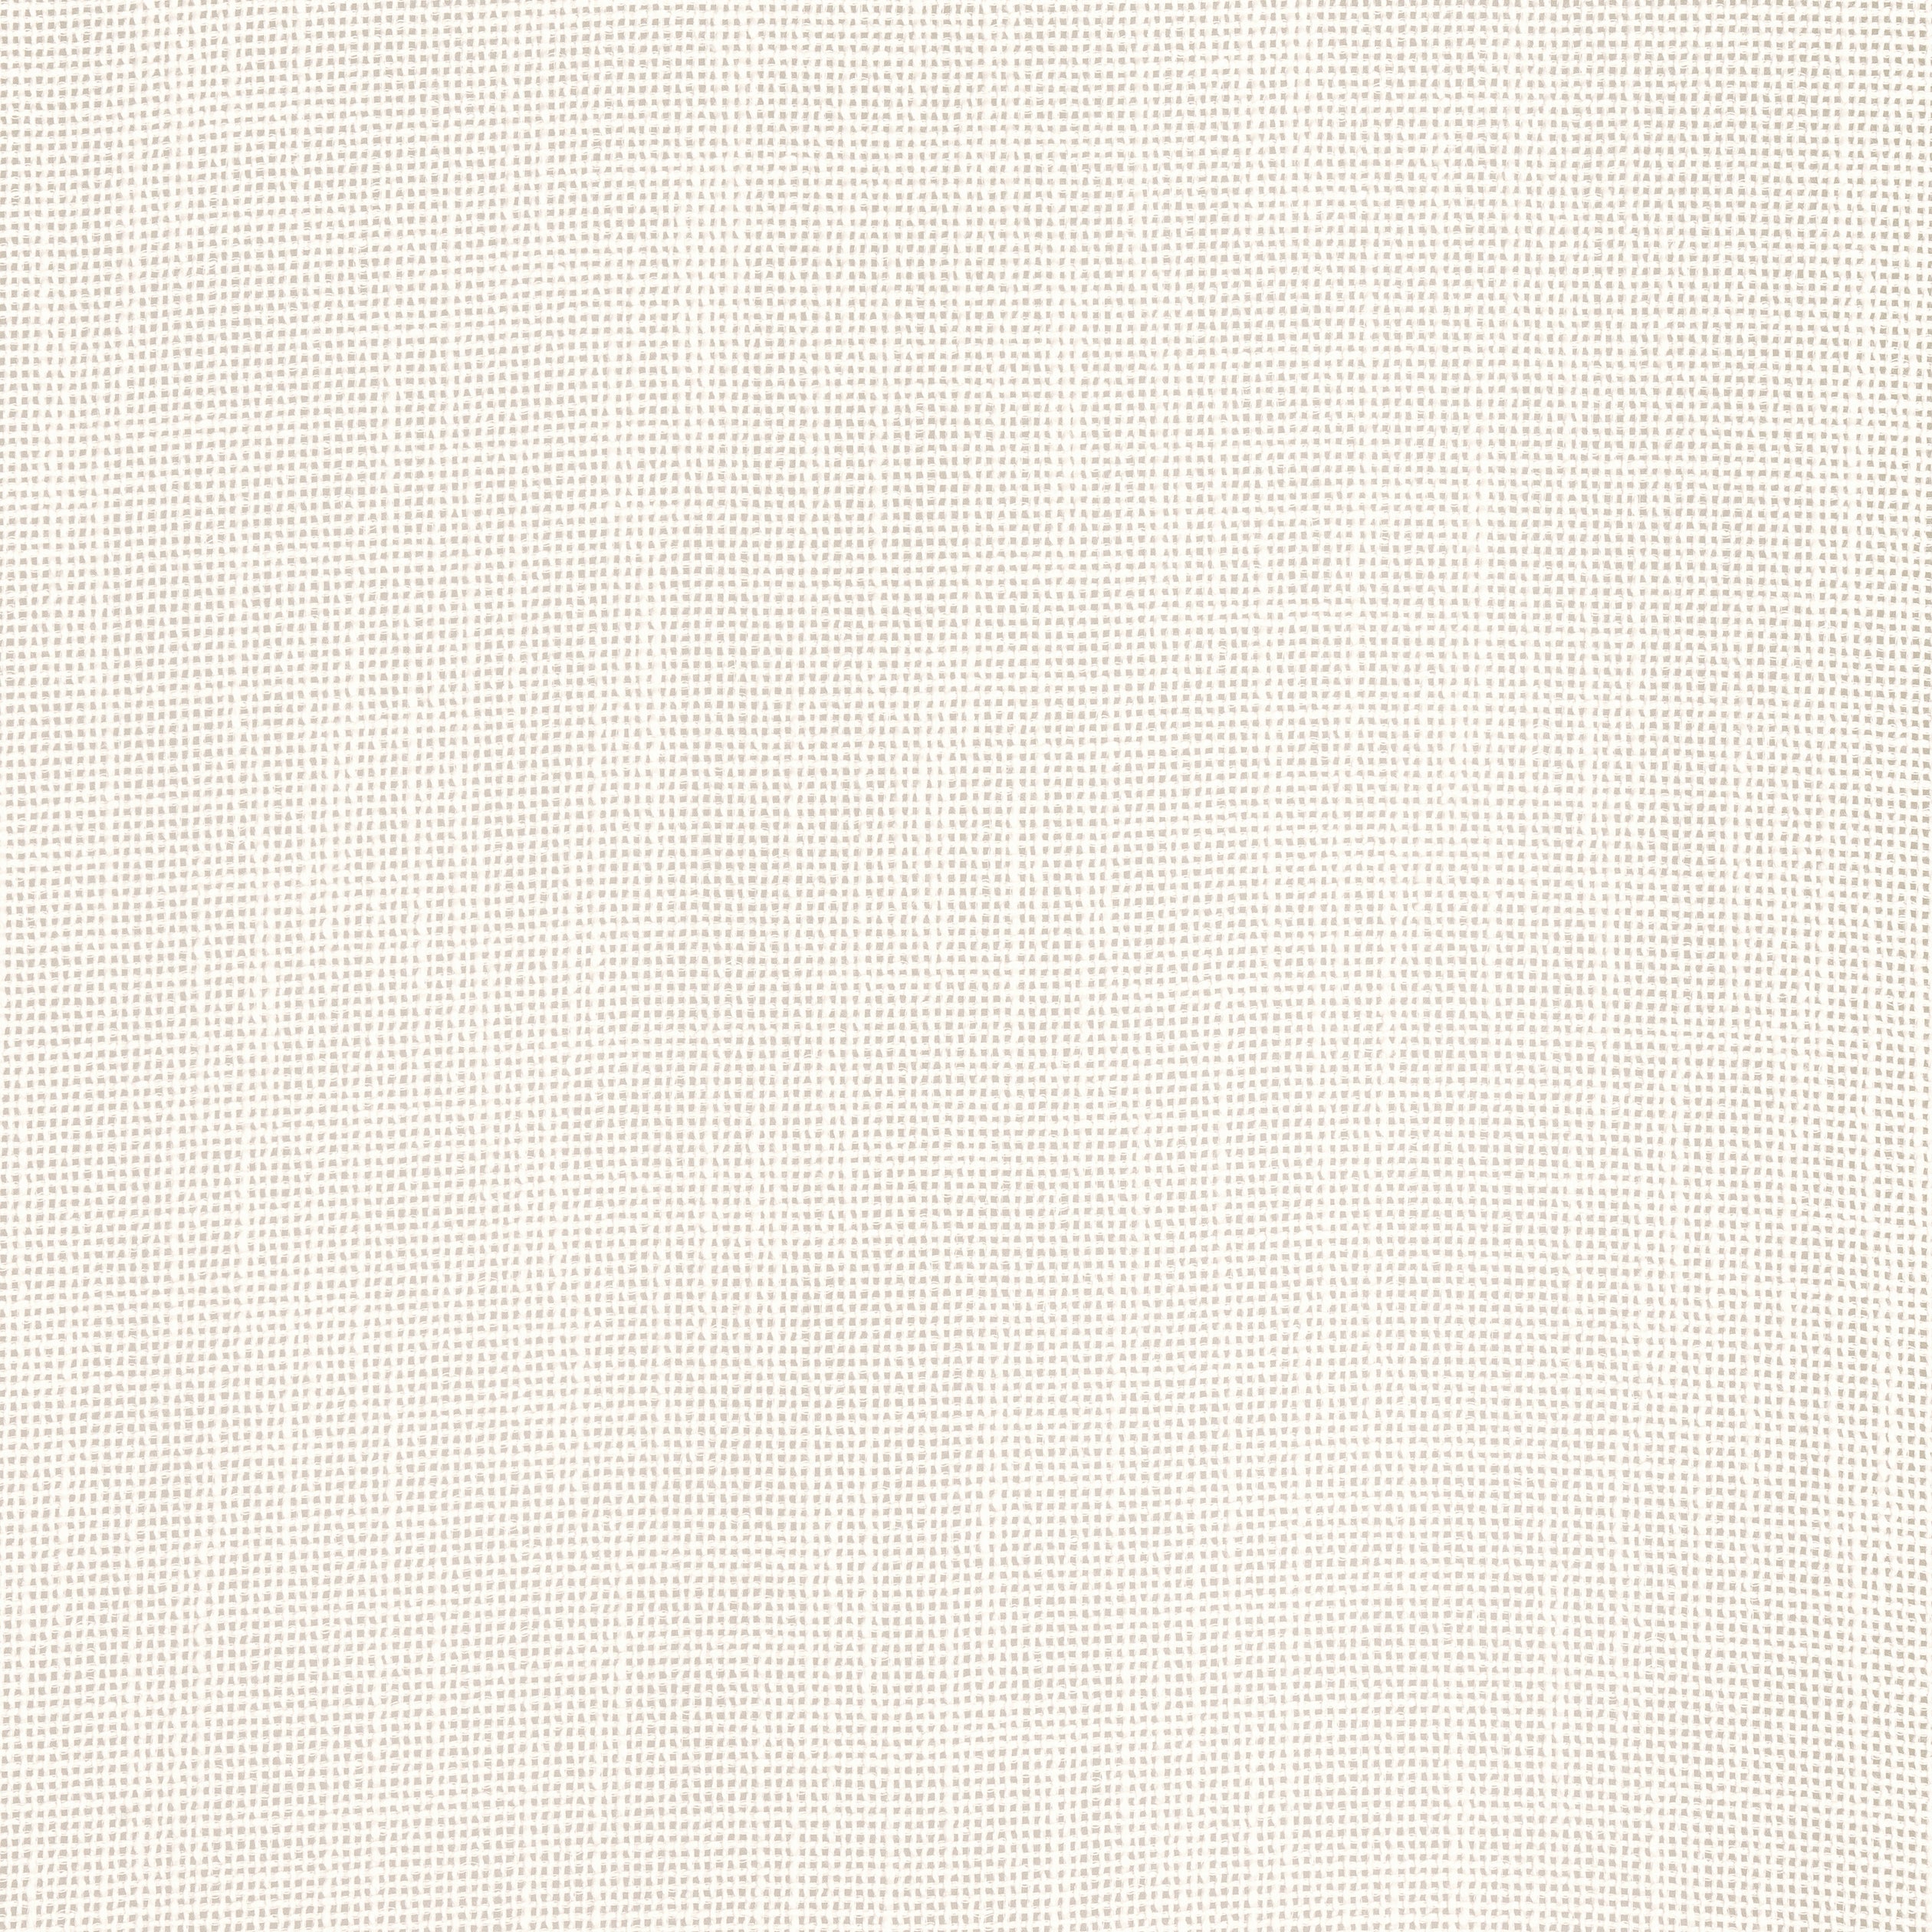 Mistral fabric in parchment color - pattern number FWW8227 - by Thibaut in the Aura collection